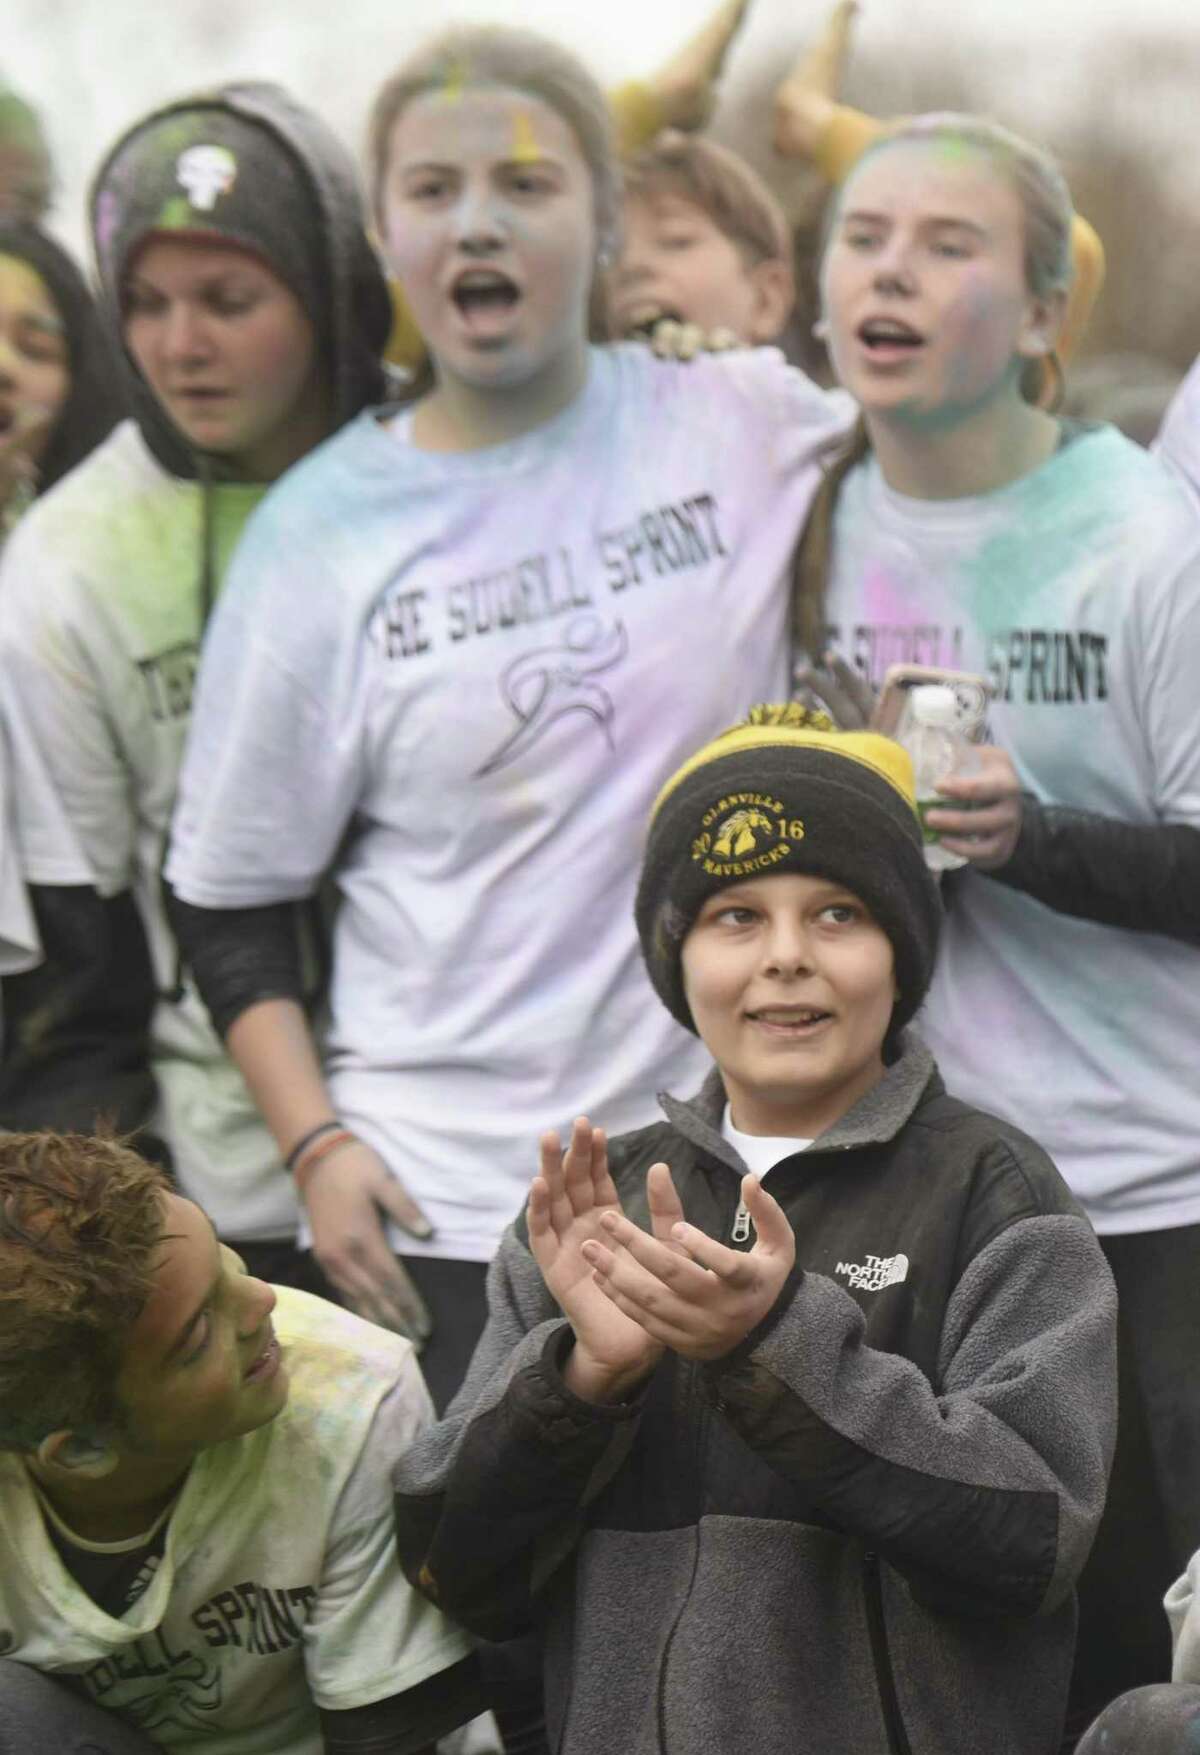 Steven Sudell, an eighth-grader who is battling brain cancer, poses with his classmates after the Sudell Sprint color run at Western Middle School in Greenwich, Conn. Wednesday, Nov. 22, 2017. Eighth-graders raised $8,000 for the family of Steven Sudell and put on a color run from the school to Hamill Rink in his honor with a pizza and ice cream party afterwards.